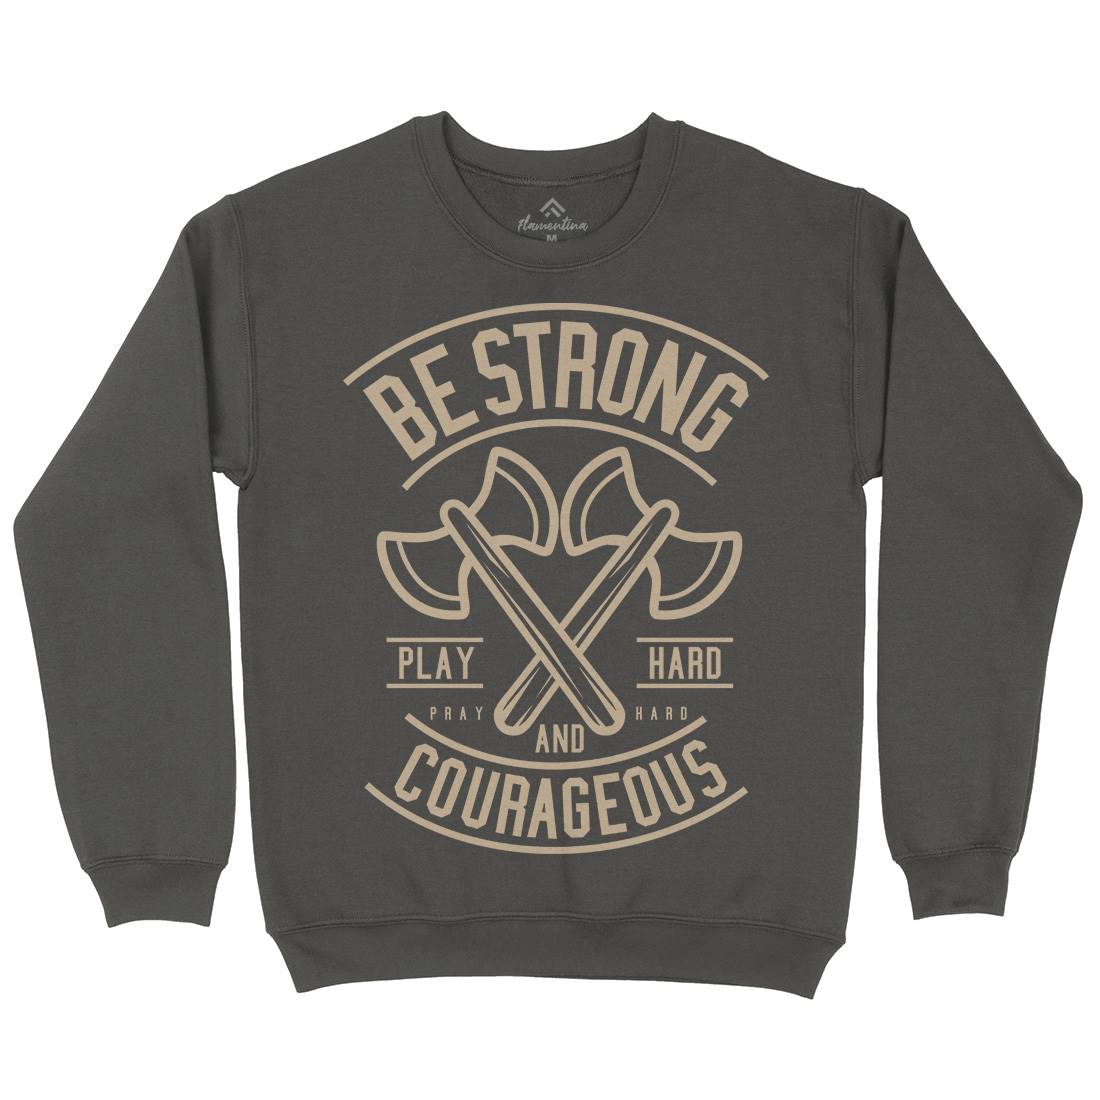 Be Strong Kids Crew Neck Sweatshirt Quotes A205